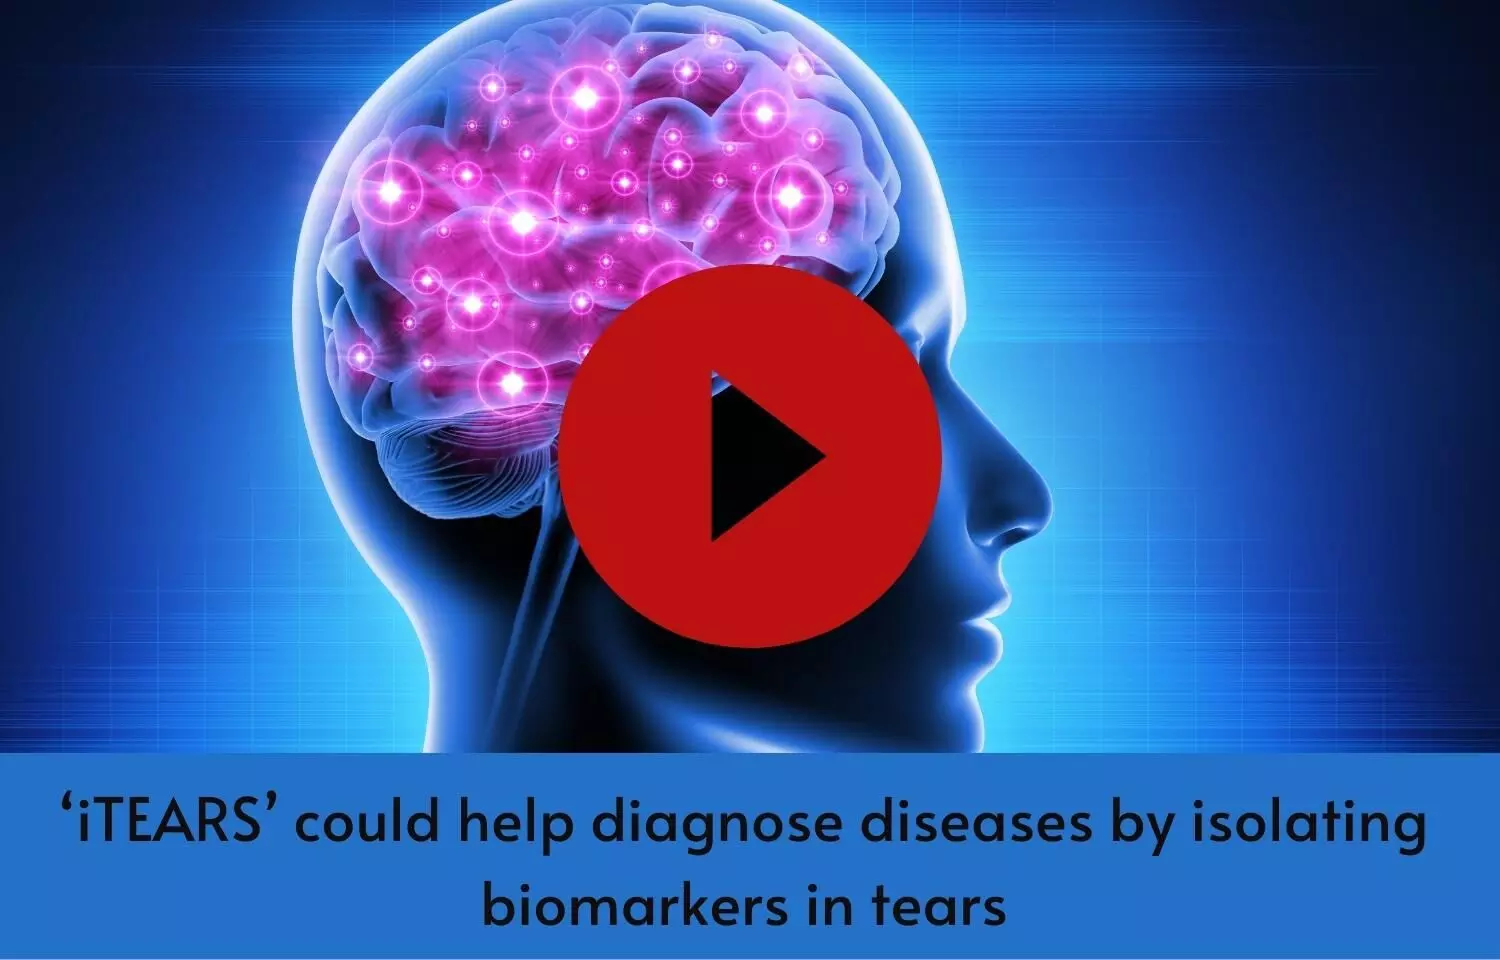 iTEARS could help diagnose diseases by isolating biomarkers in tears